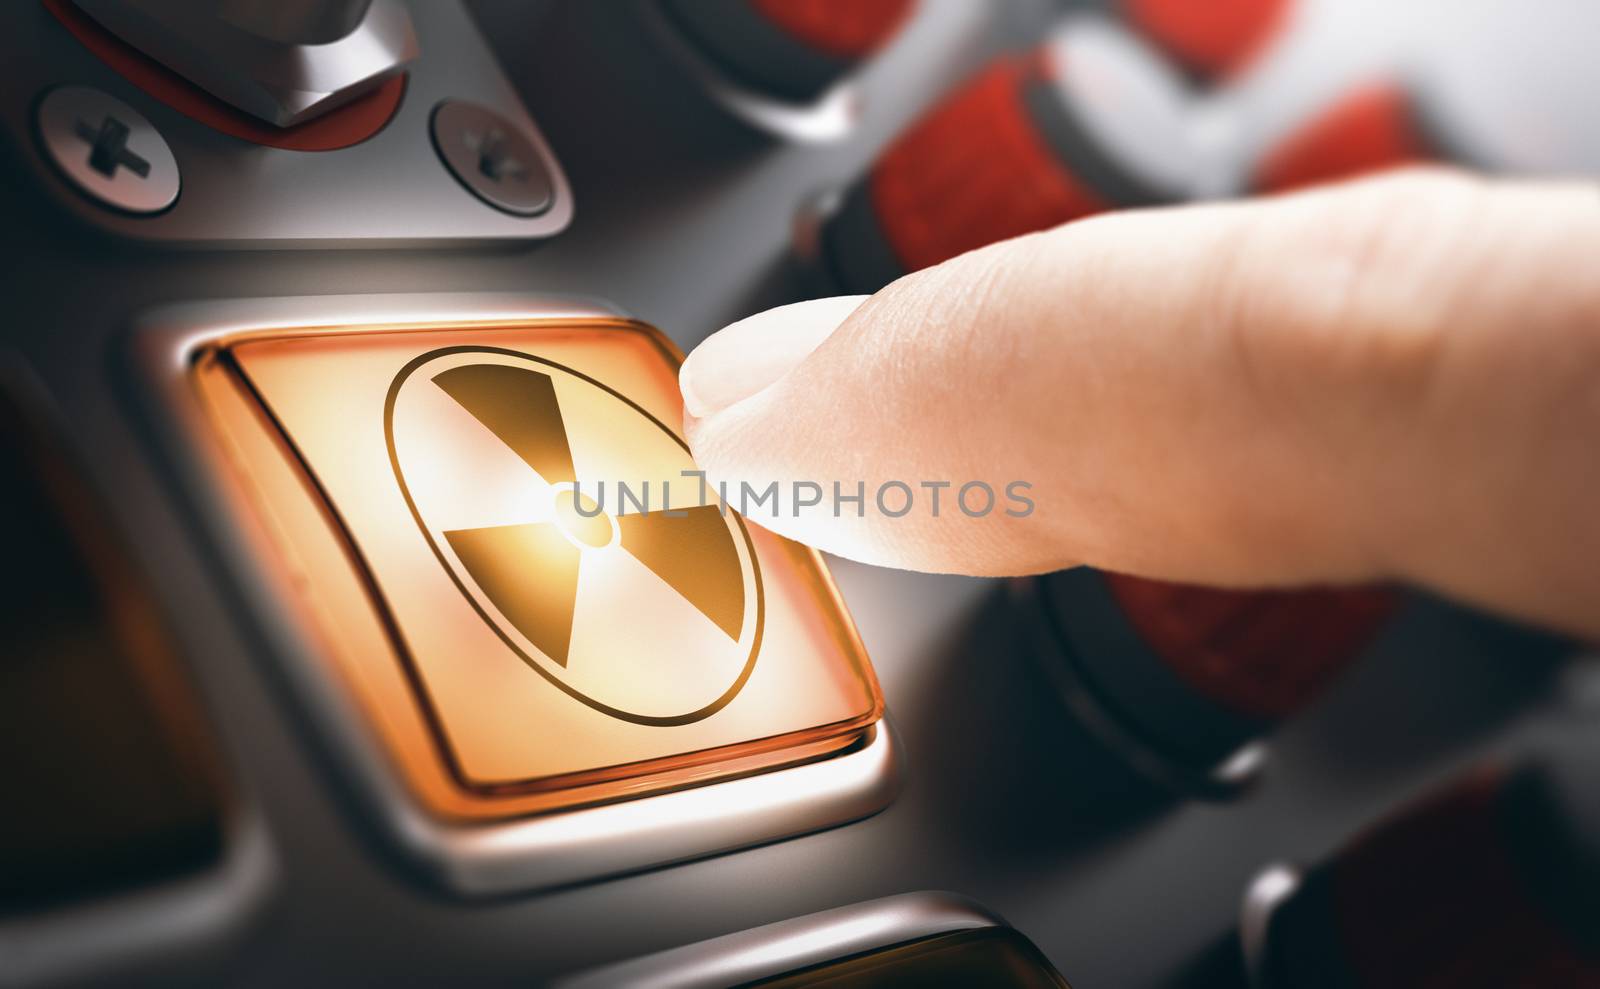 Finger pressing a nuclear button on a control panel. Composite image between a hand photography and a 3D background.